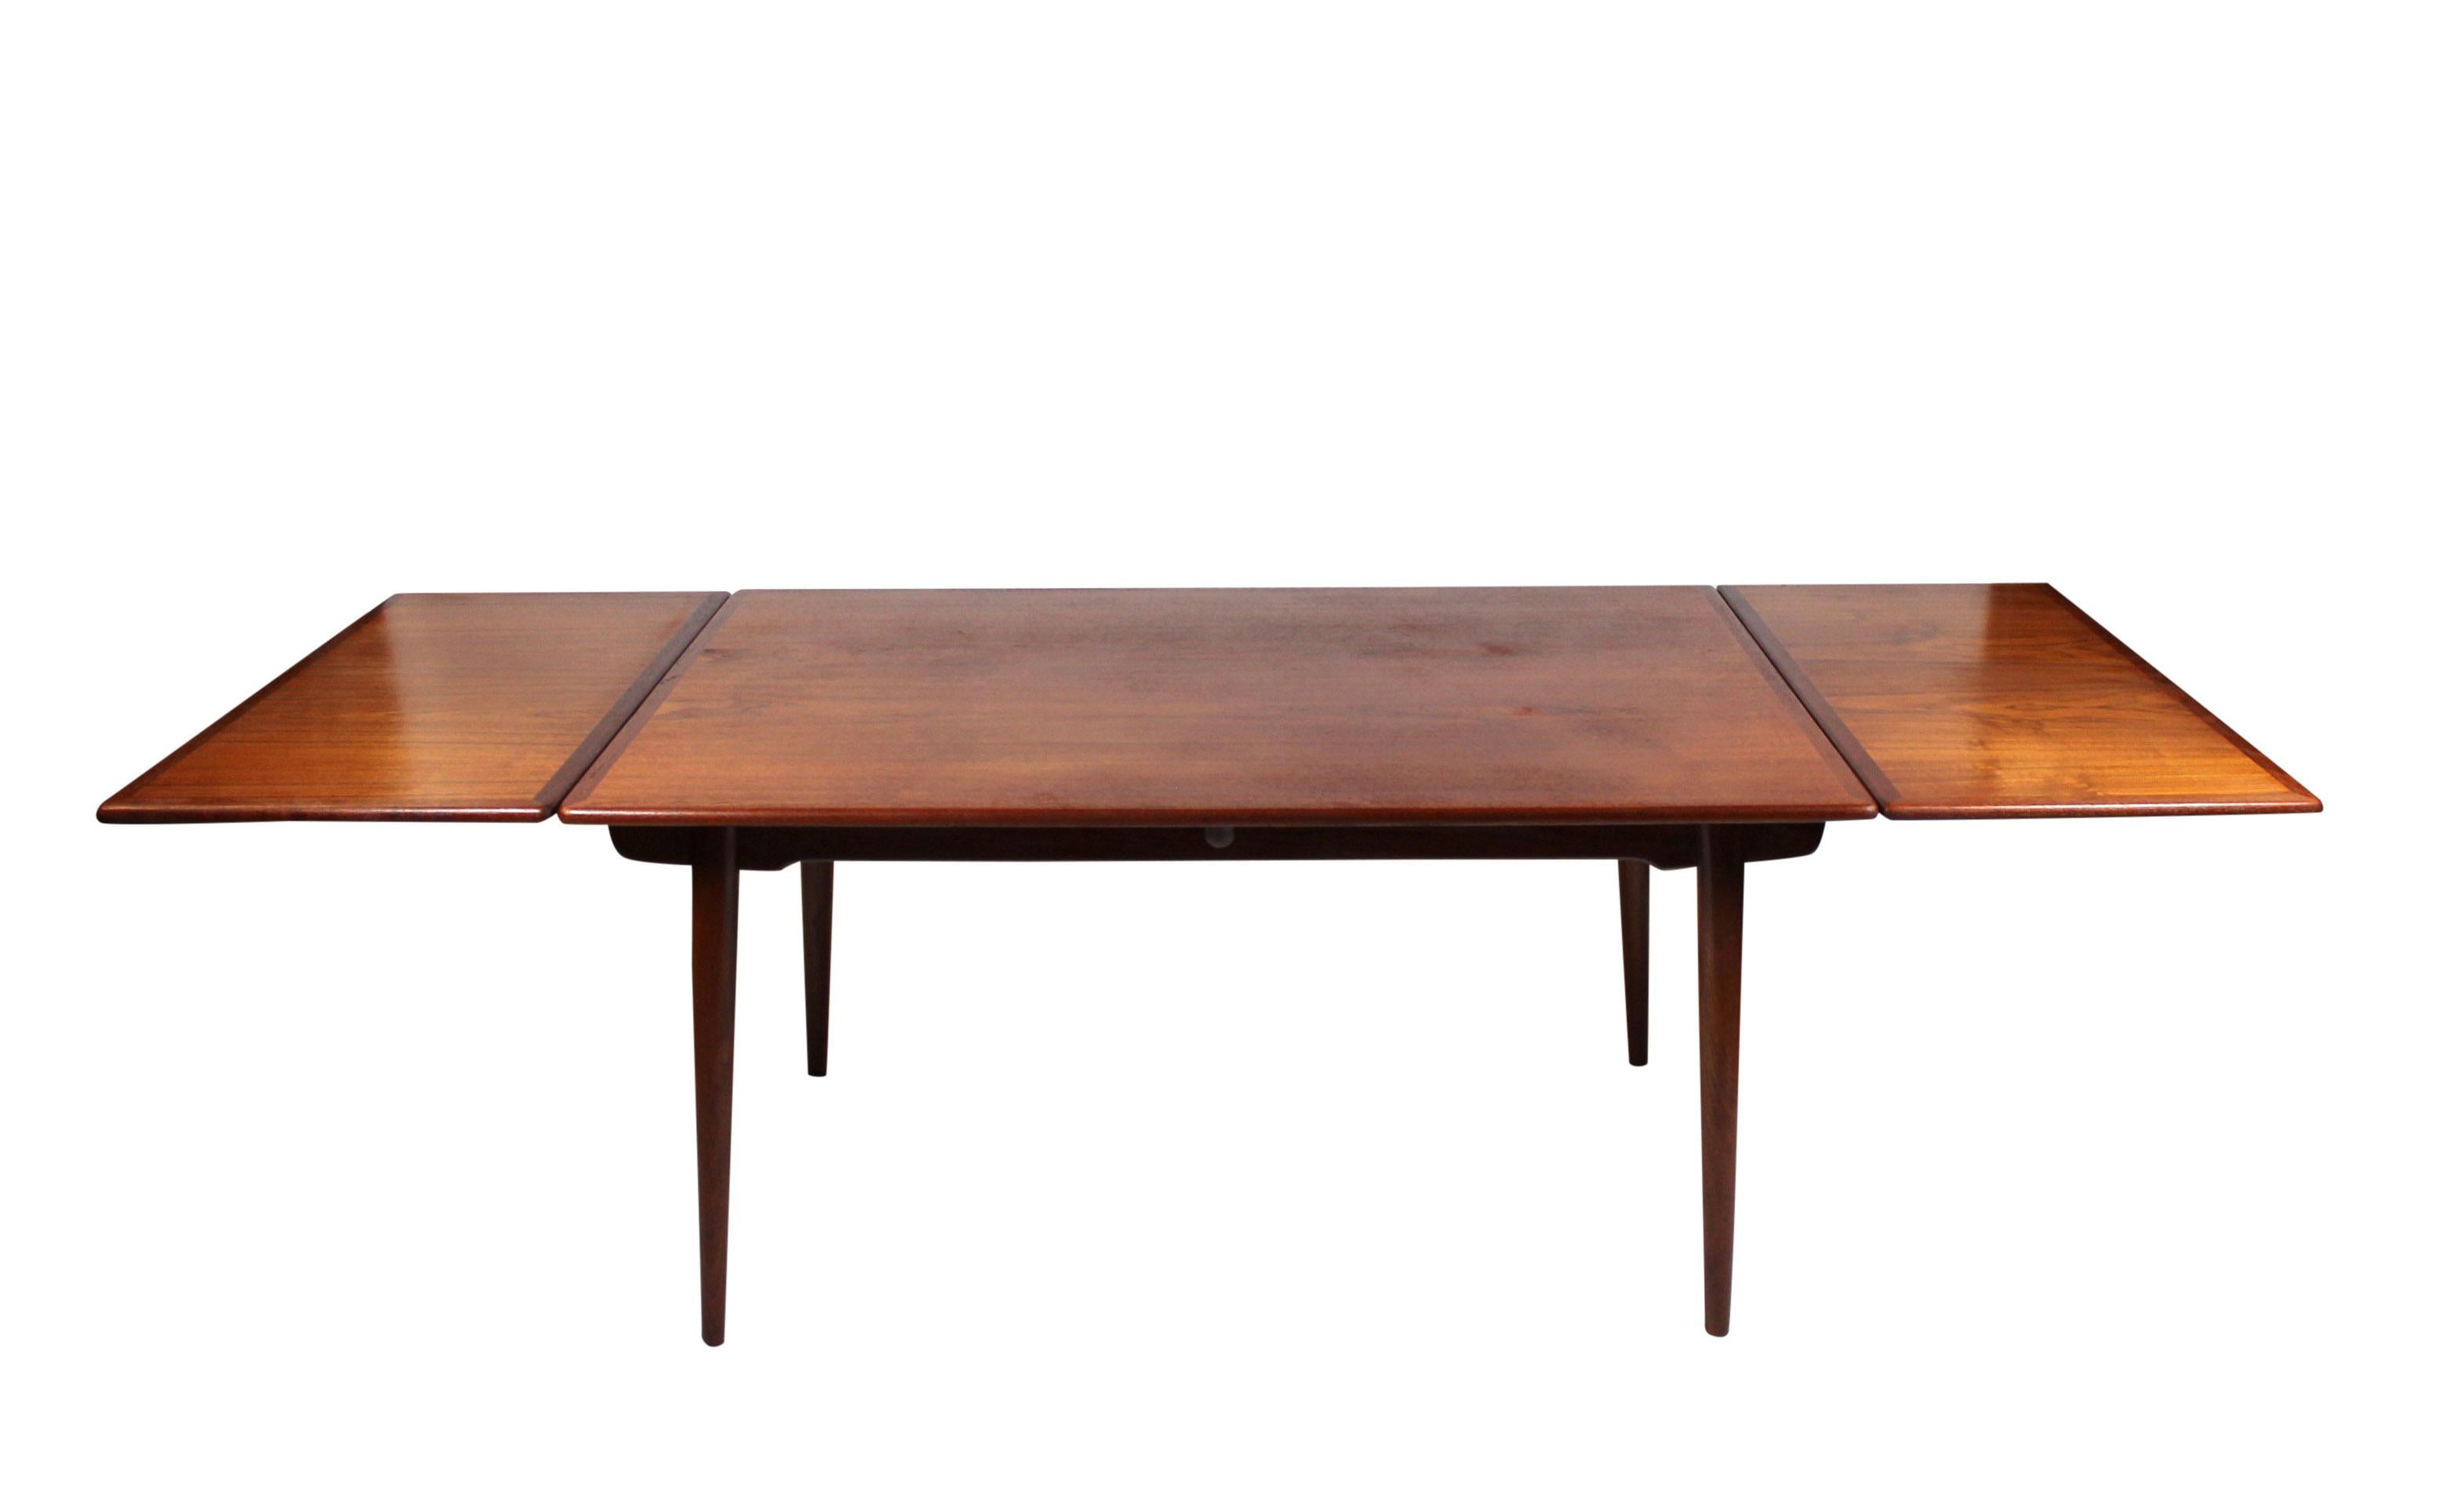 Elegant Dining Table with Extensions in Teak, a timeless creation by renowned designer Hans J. Wegner and masterfully crafted by Andreas Tuck in the 1960s.

This exquisite dining table embodies Wegner's signature blend of functionality and beauty.